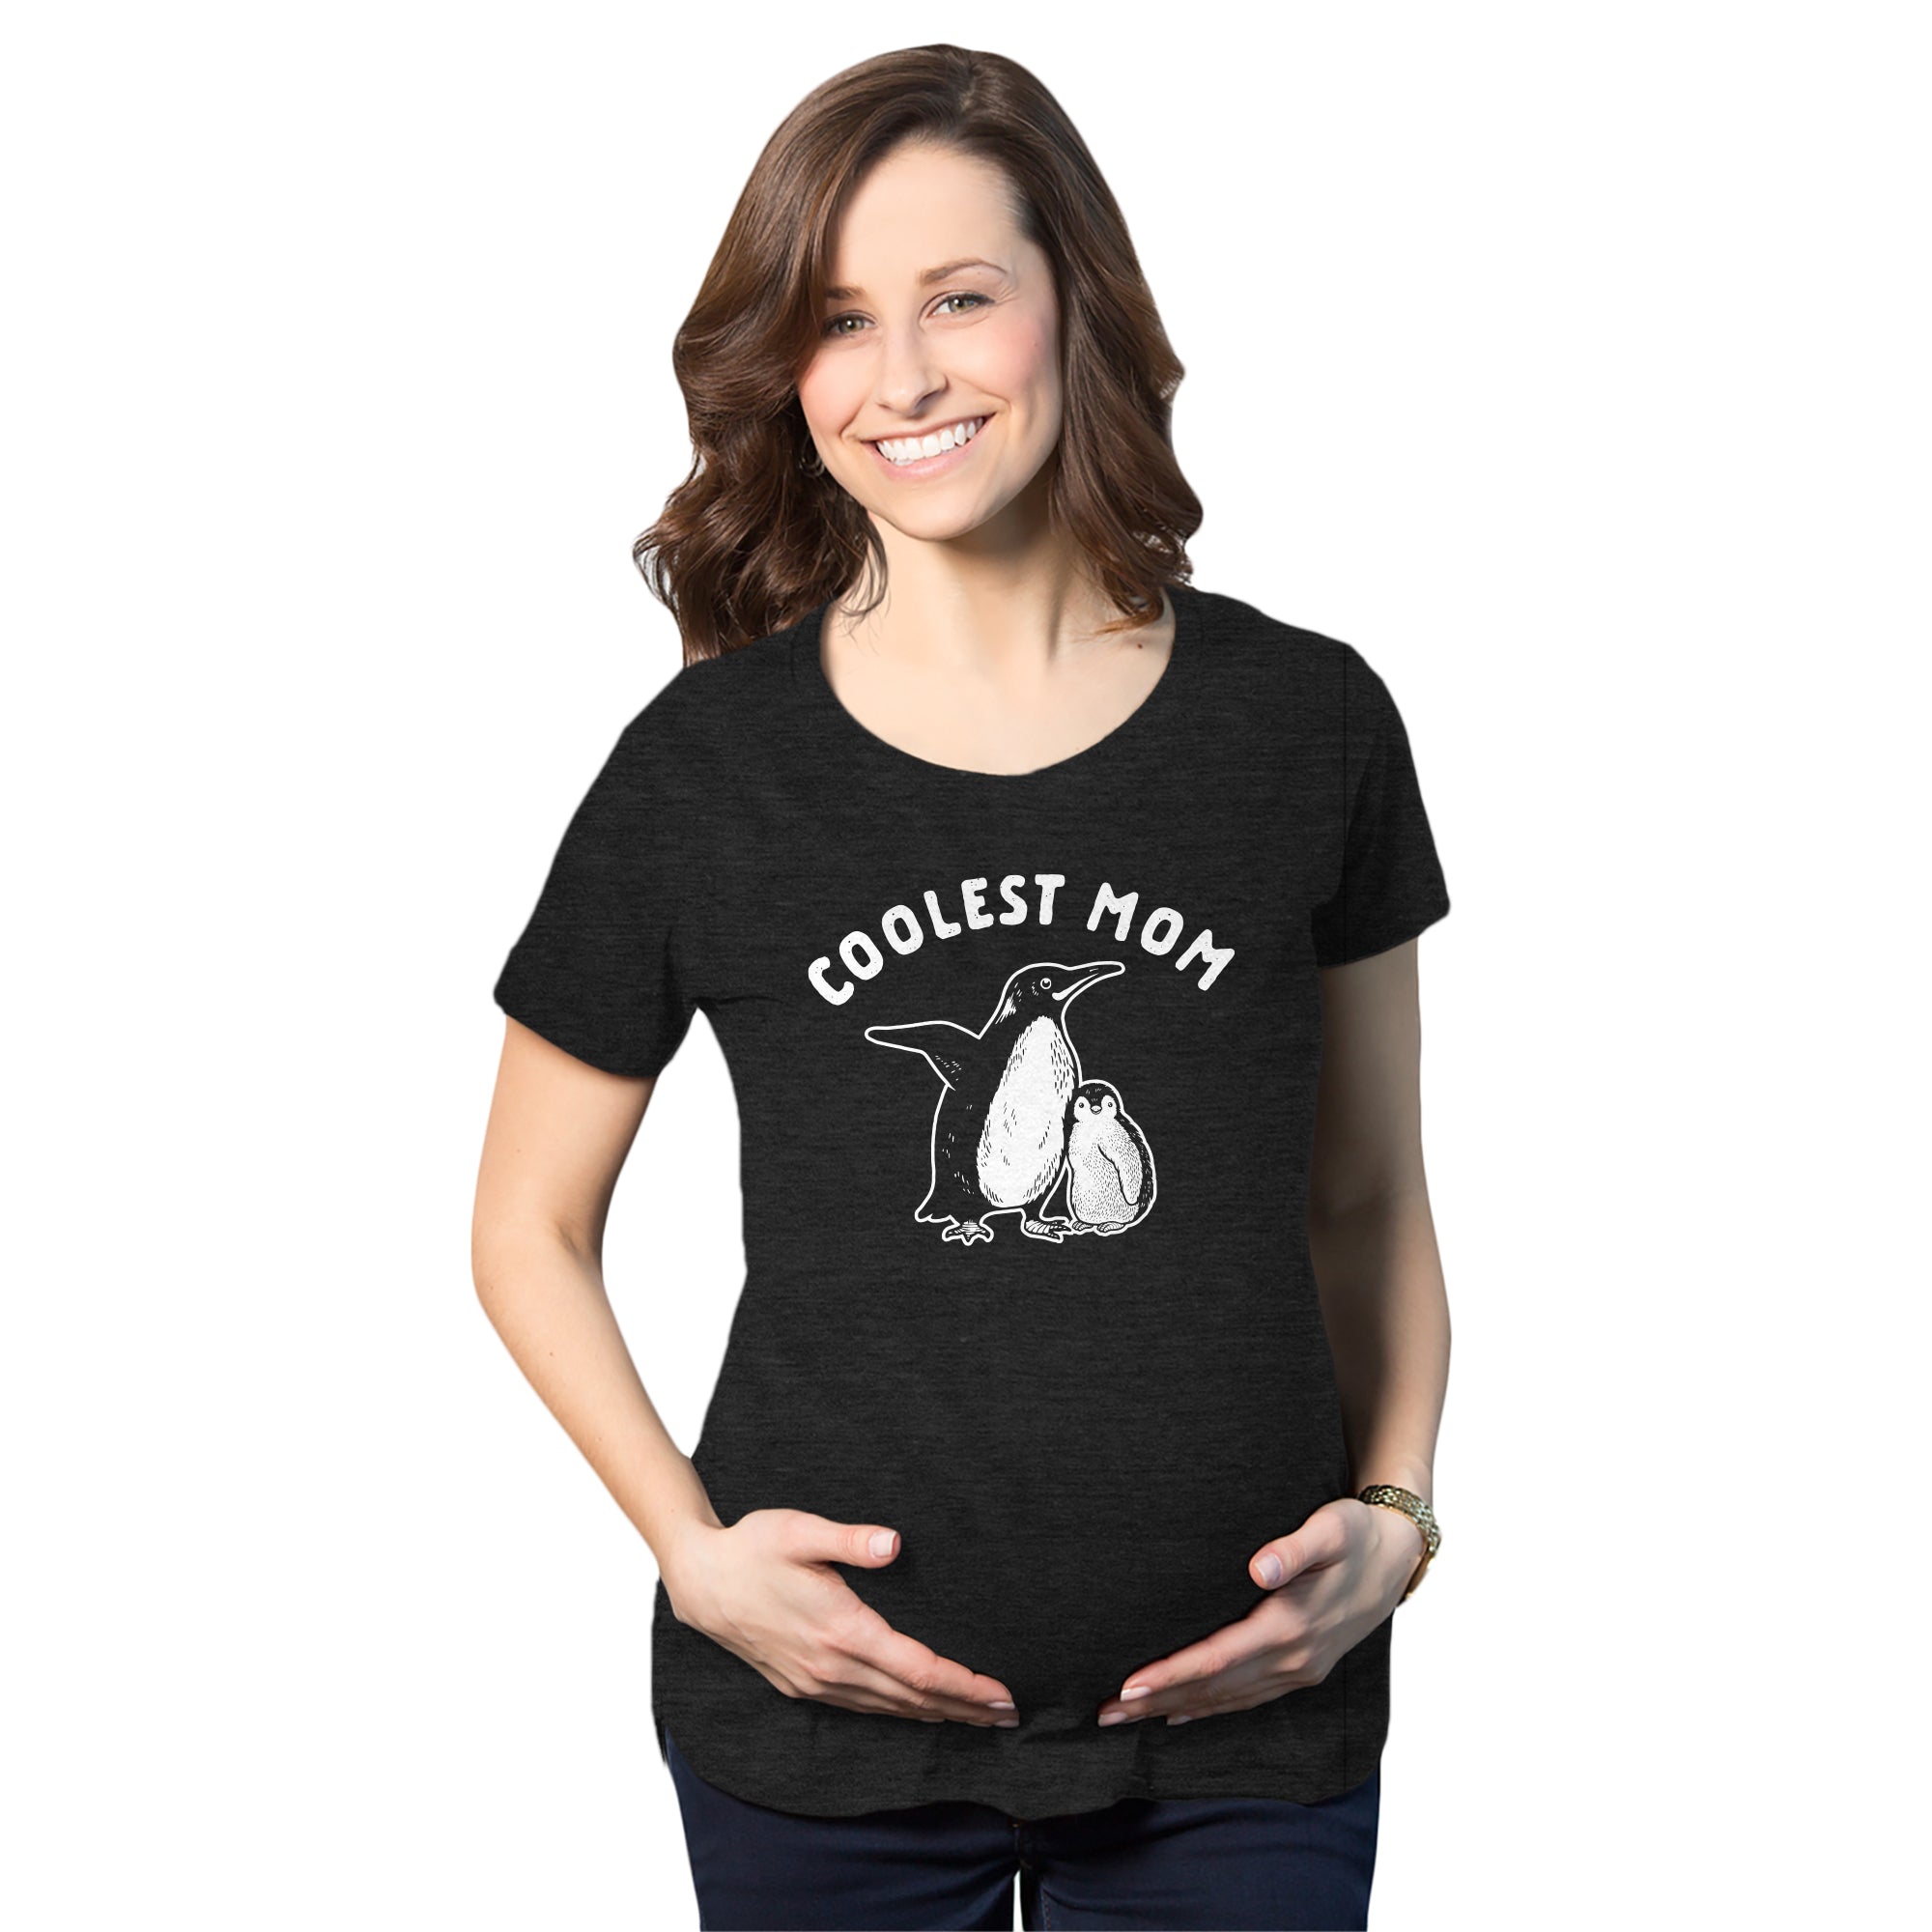 Funny Heather Black Coolest Mom Maternity T Shirt Nerdy Mother's Day Animal Tee